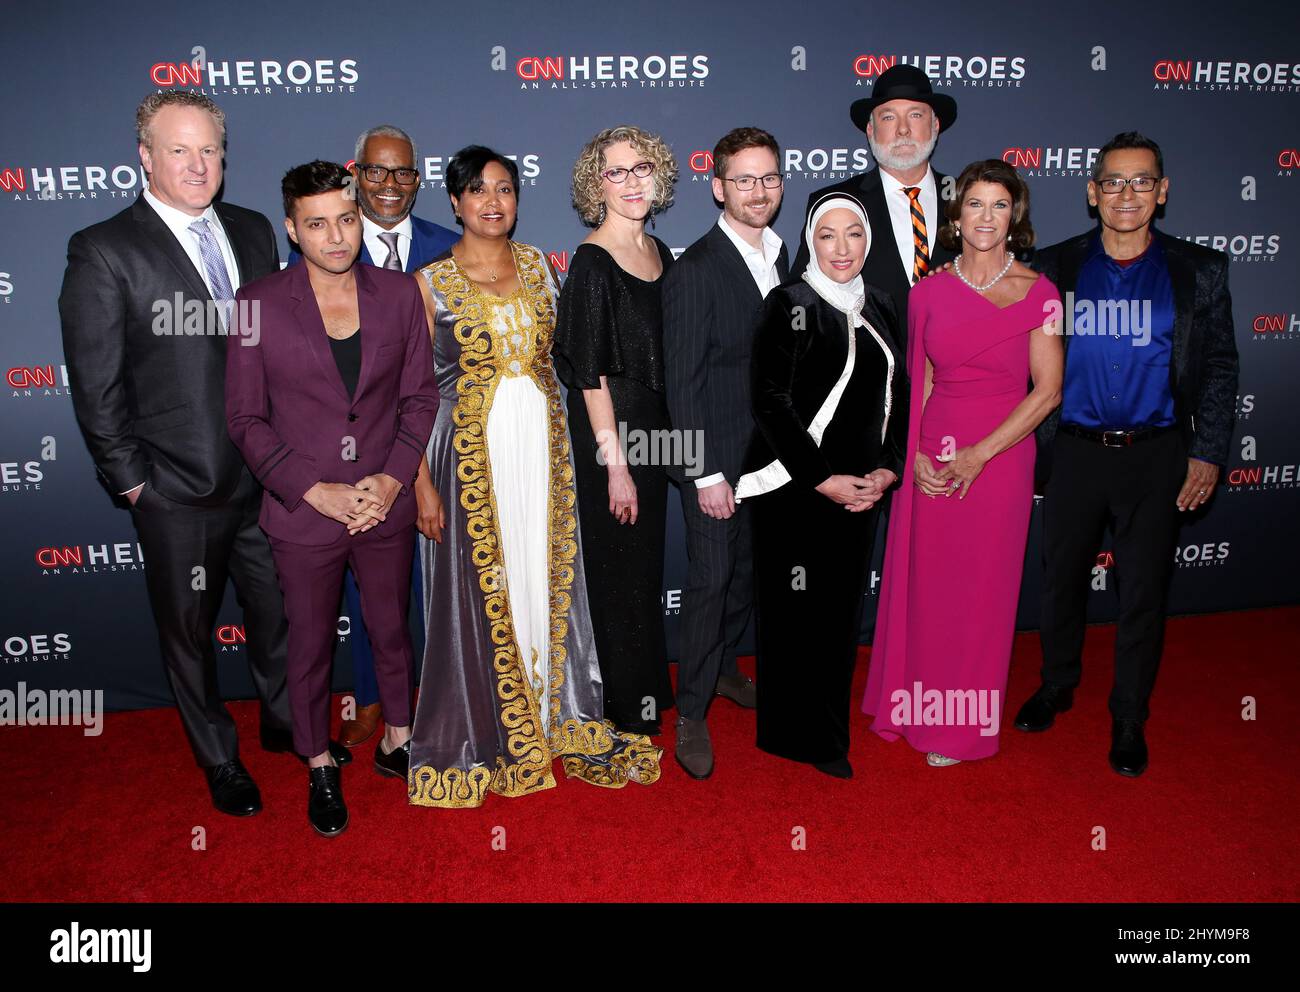 CNN Heroes attending the 13th Annual CNN Heroes: An All-Star Tribute held at the Museum of Natural History on December 8, 2019 in New York. Stock Photo